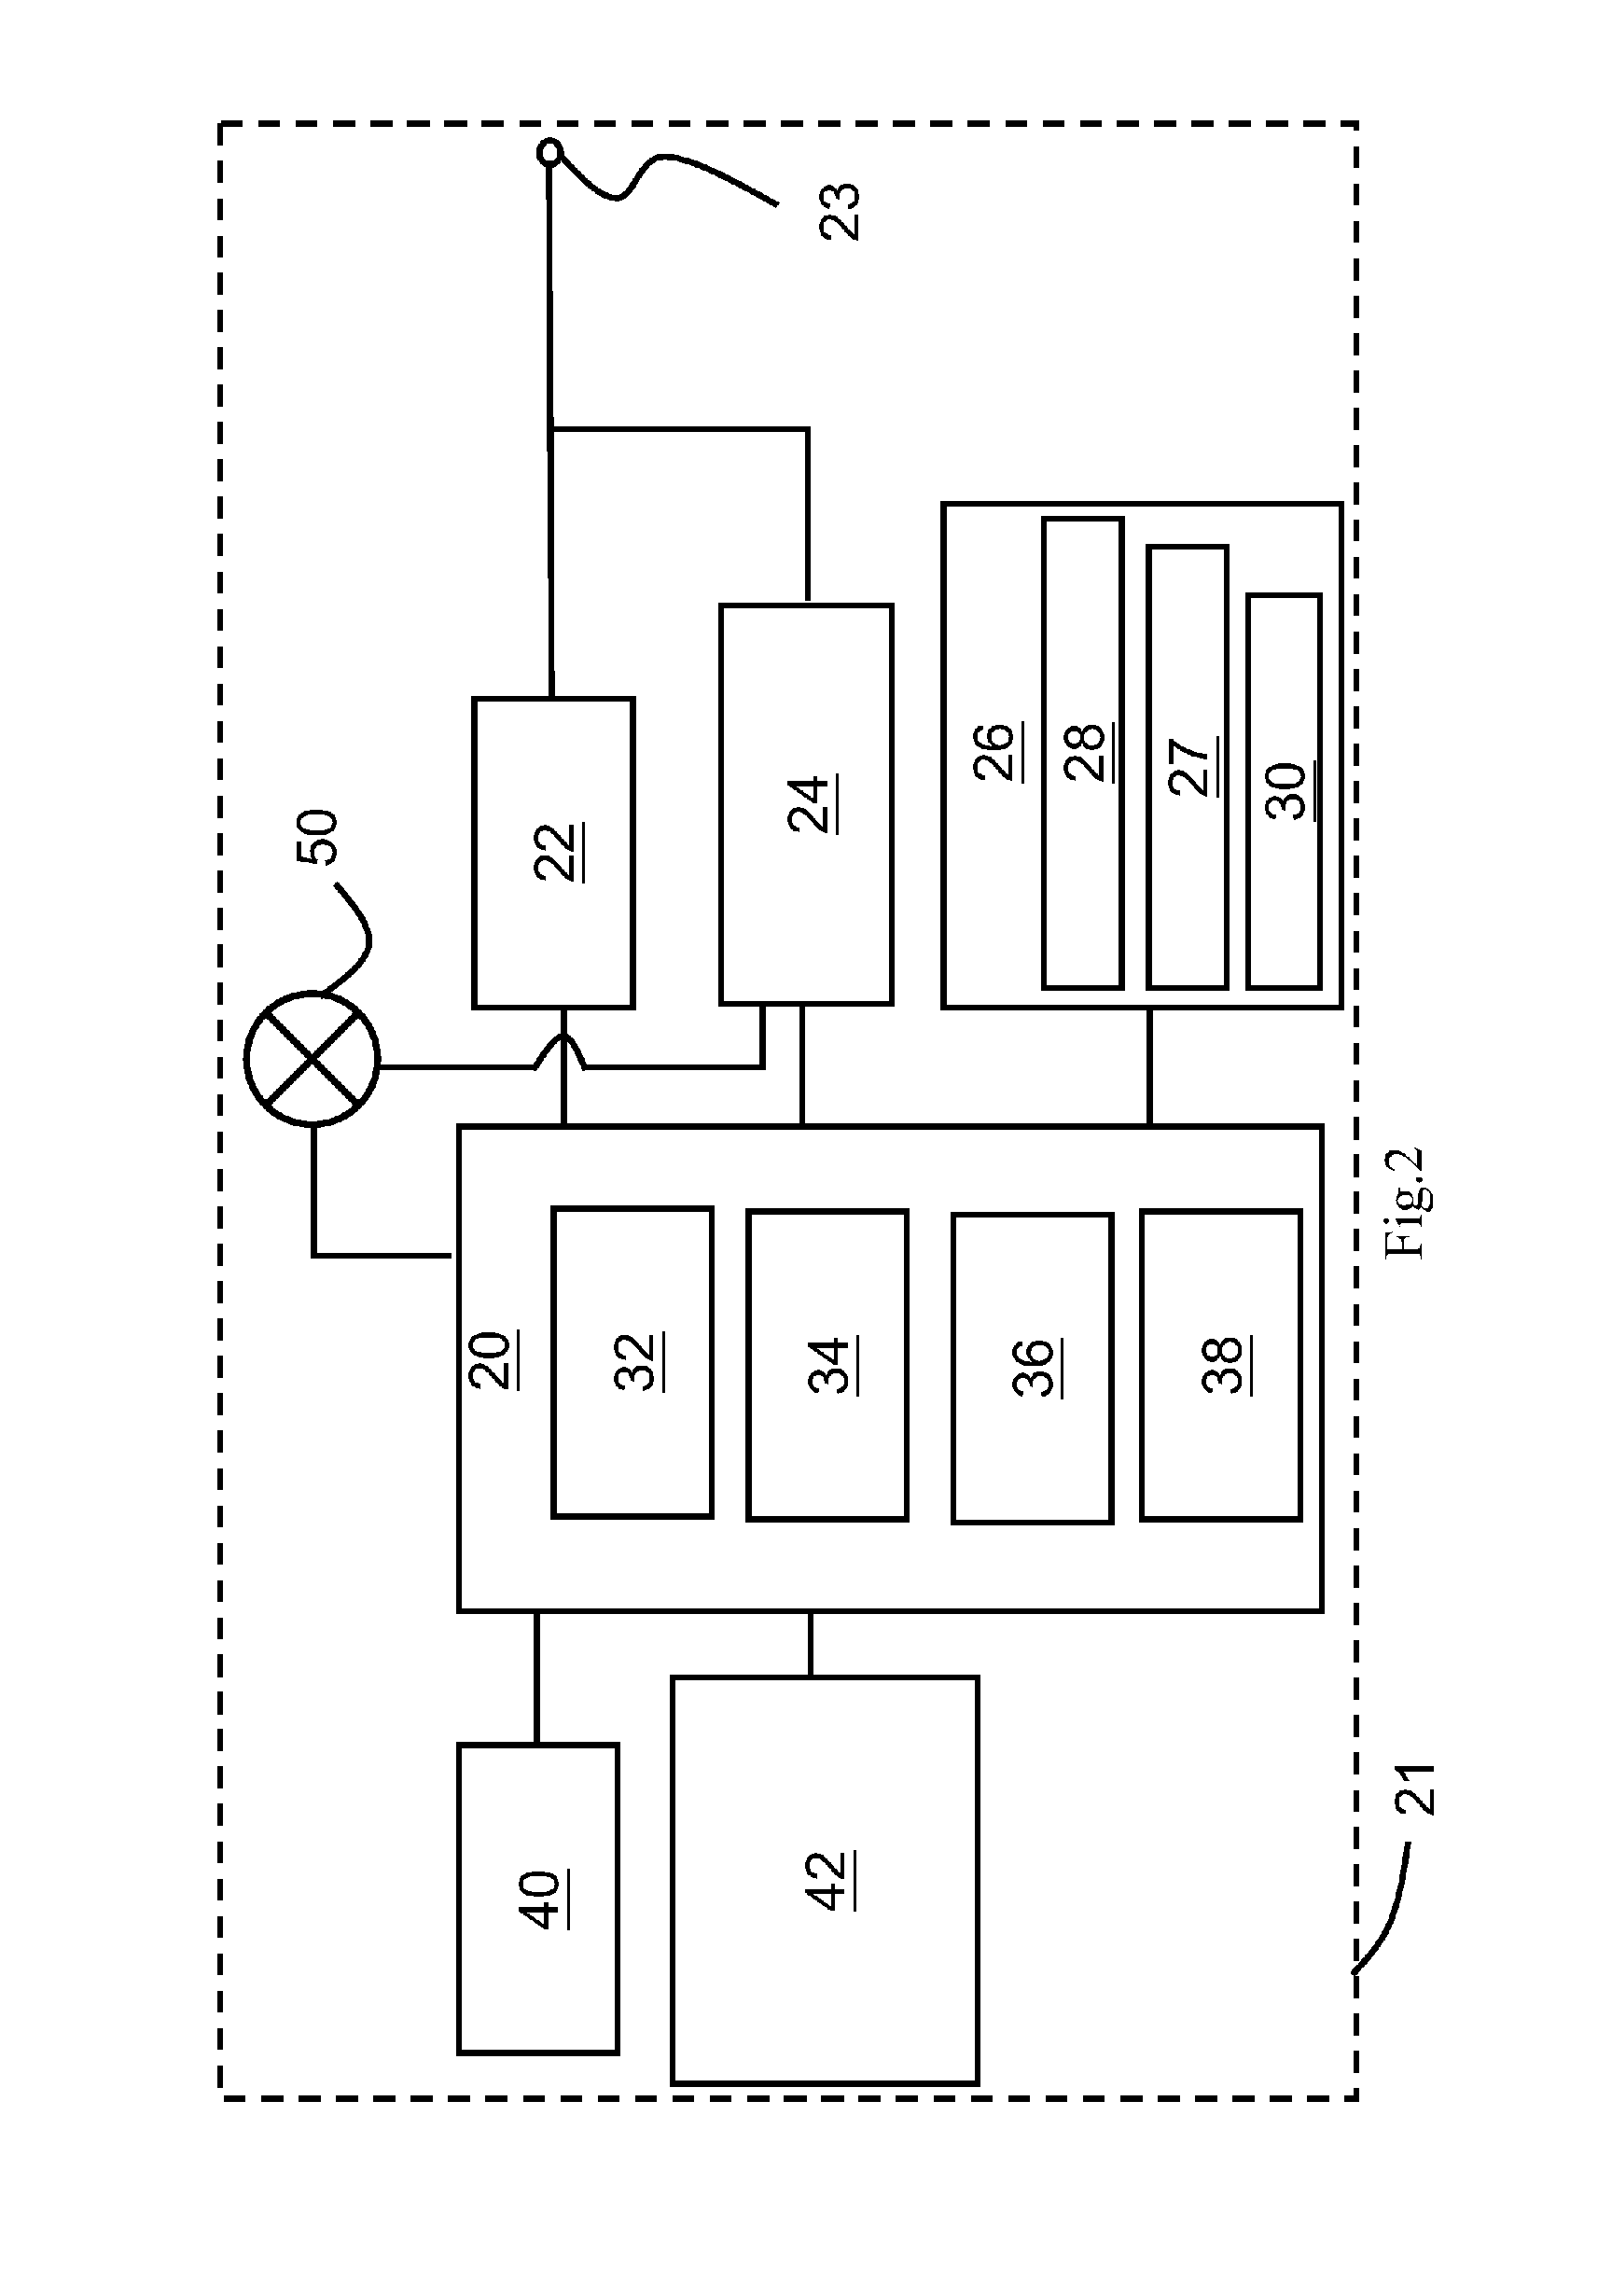 Apparatus and system for LED street lamp monitoring and control